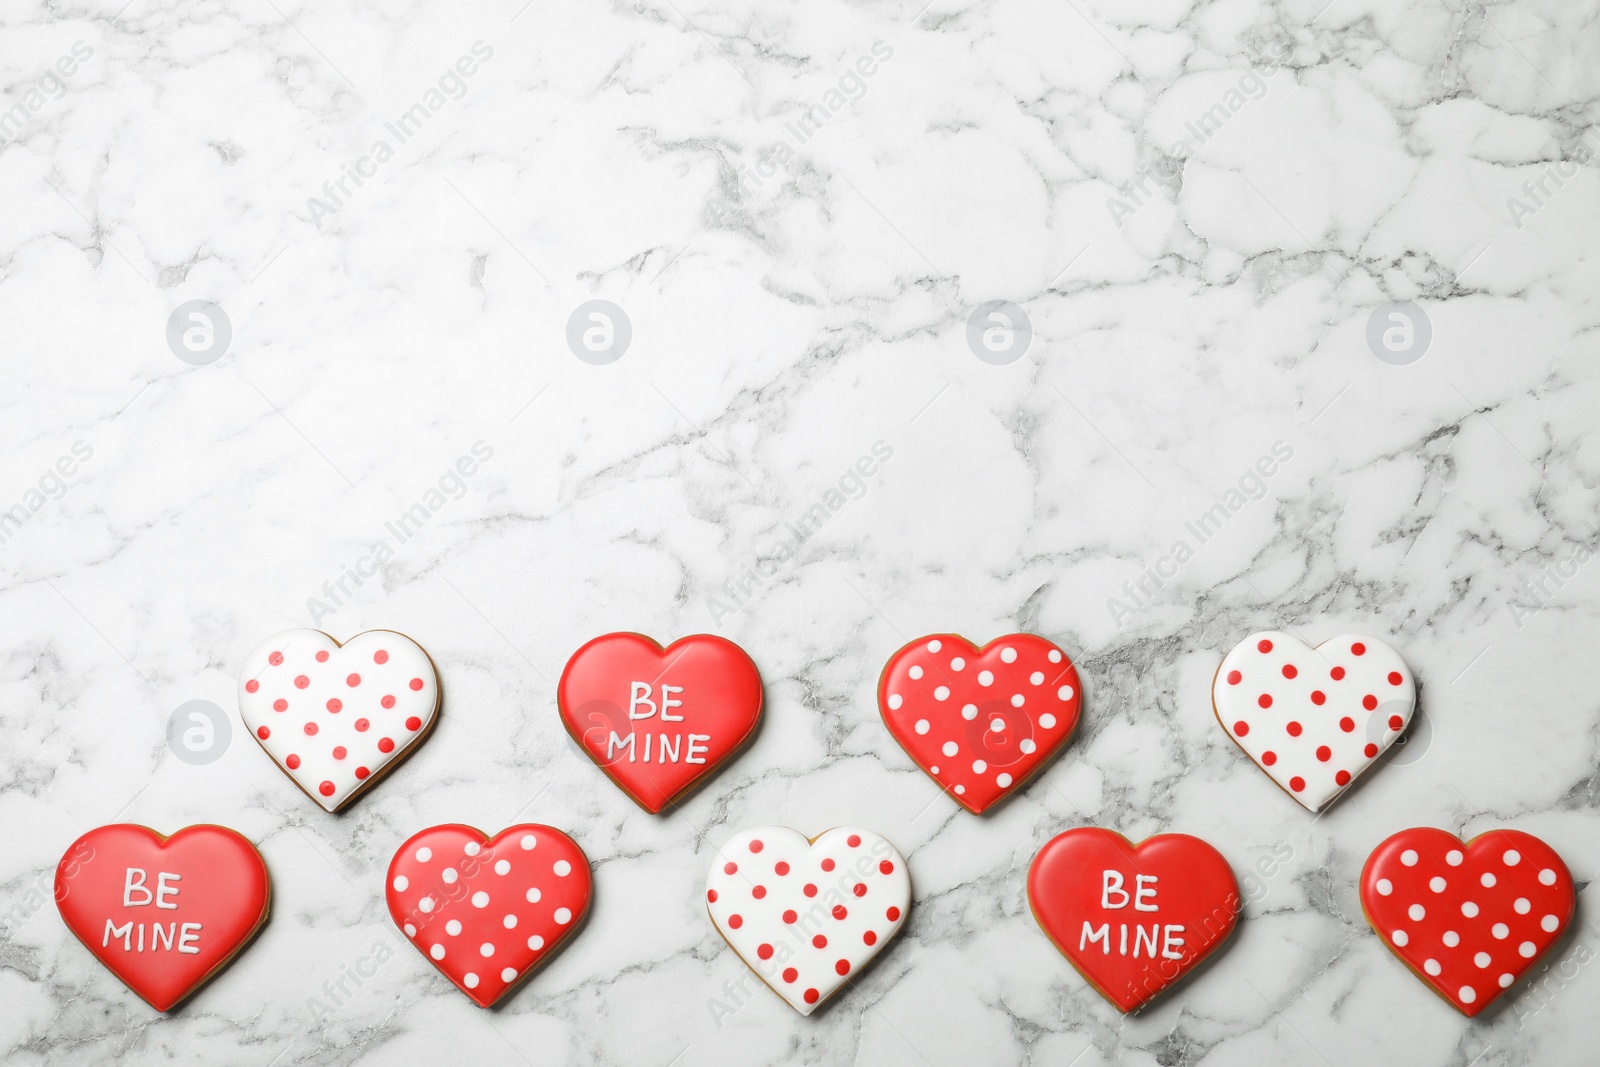 Photo of Valentine's day cookies on white marble table, flat lay. Space for text